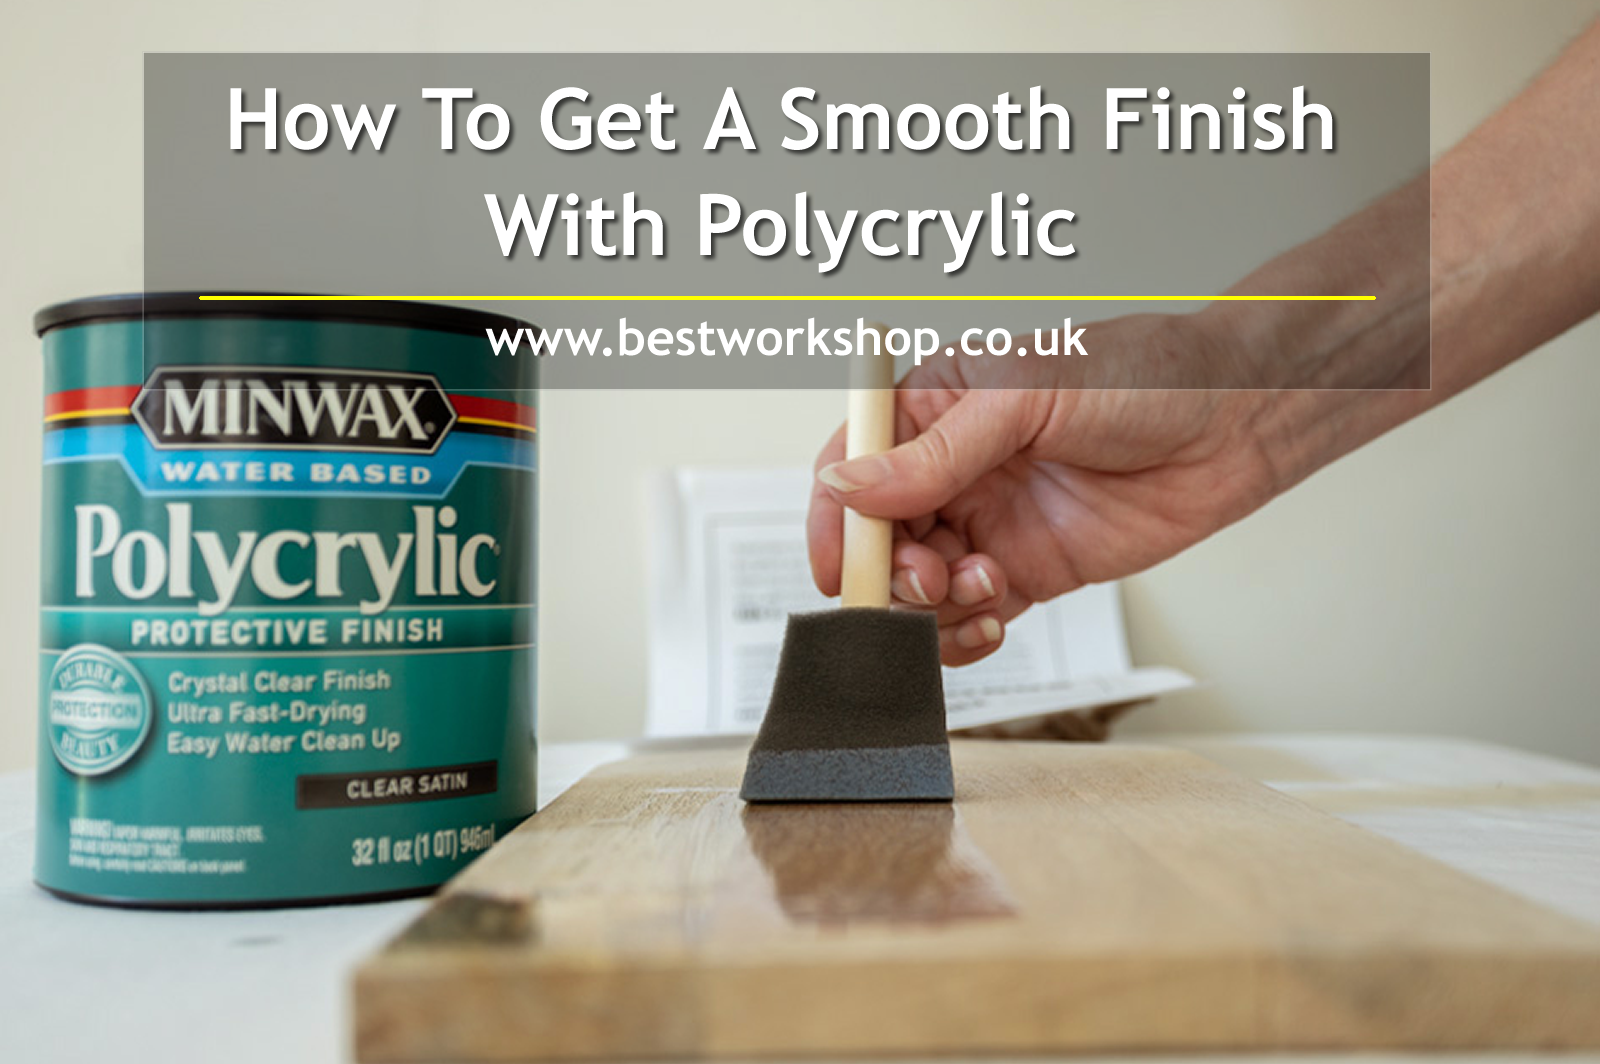 How To Get A Smooth Finish With Polycrylic